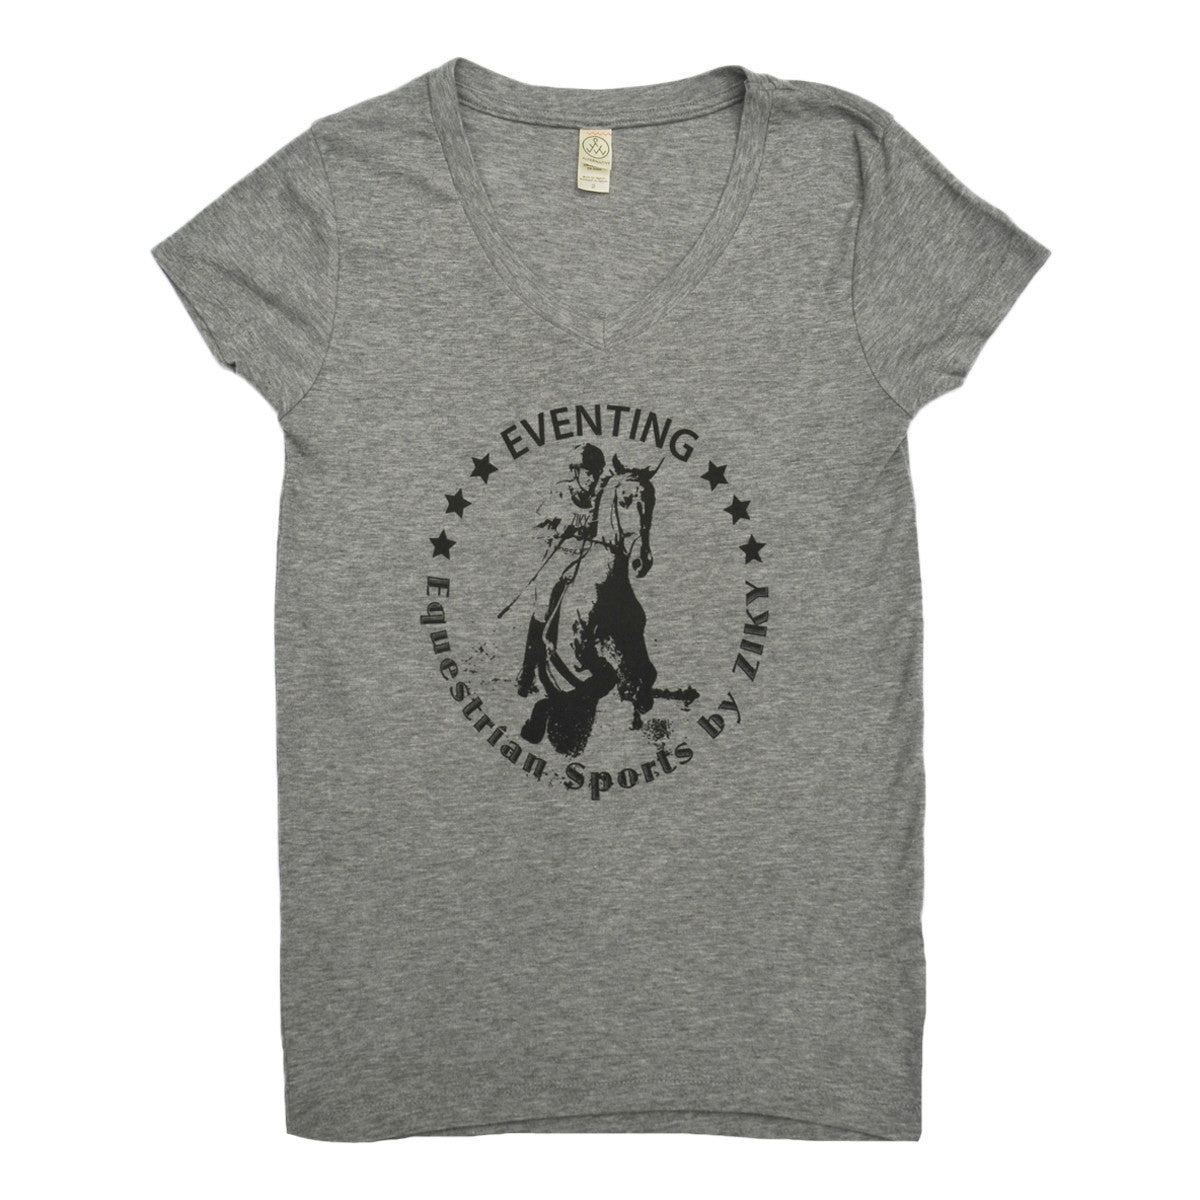 Horse eventing t-shirt